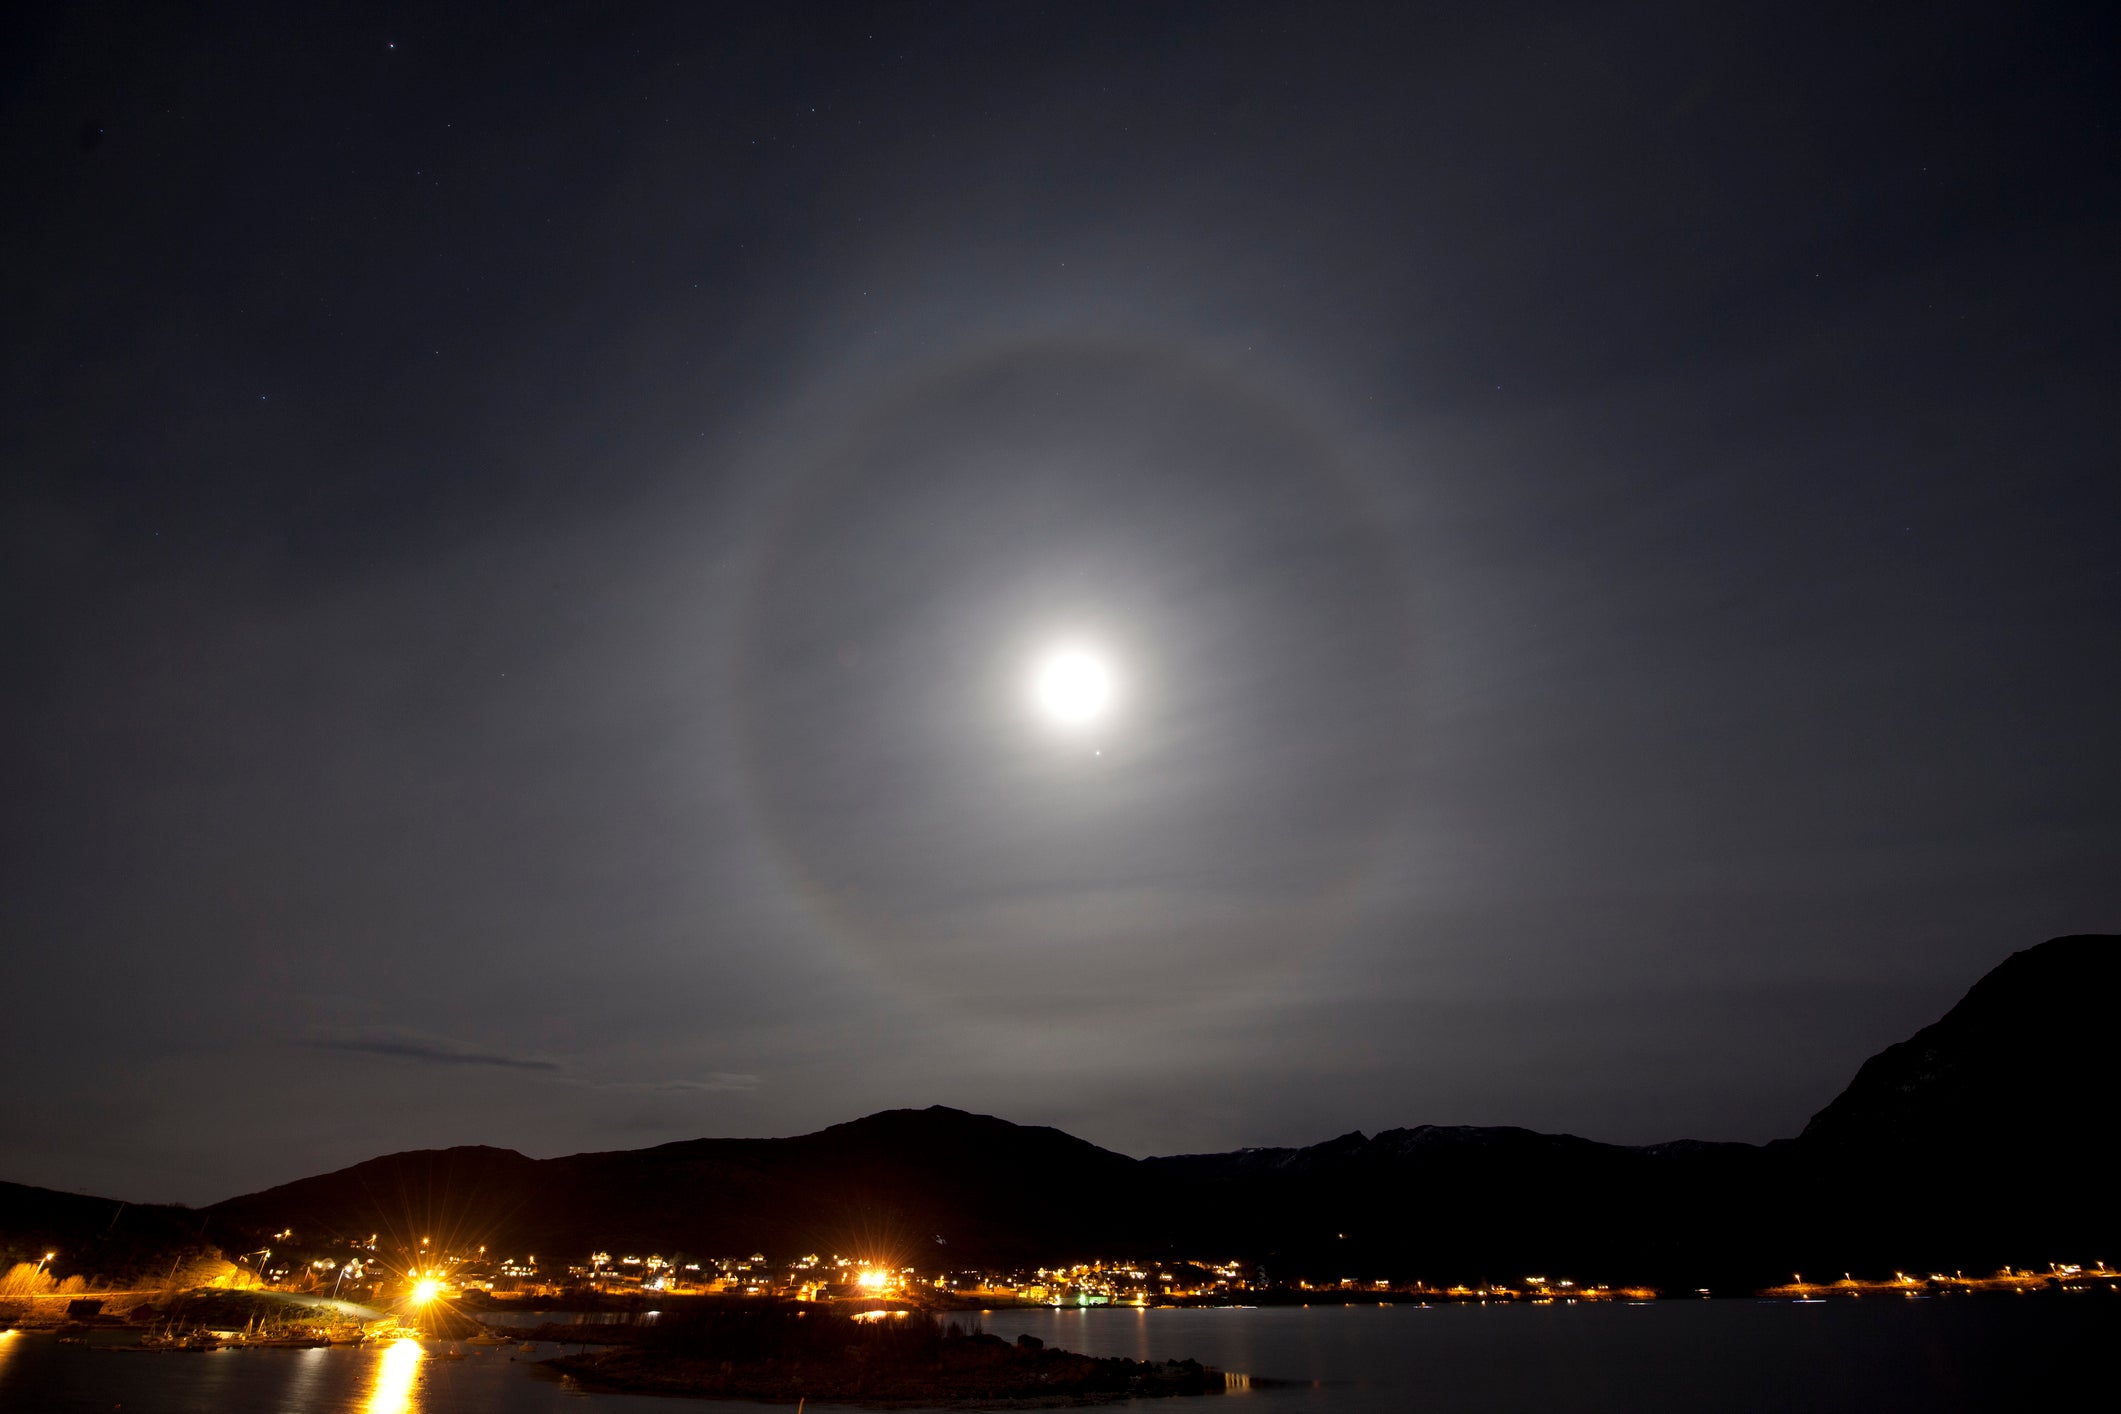 The moon with a halo over the city of Tromso in arctic Norway